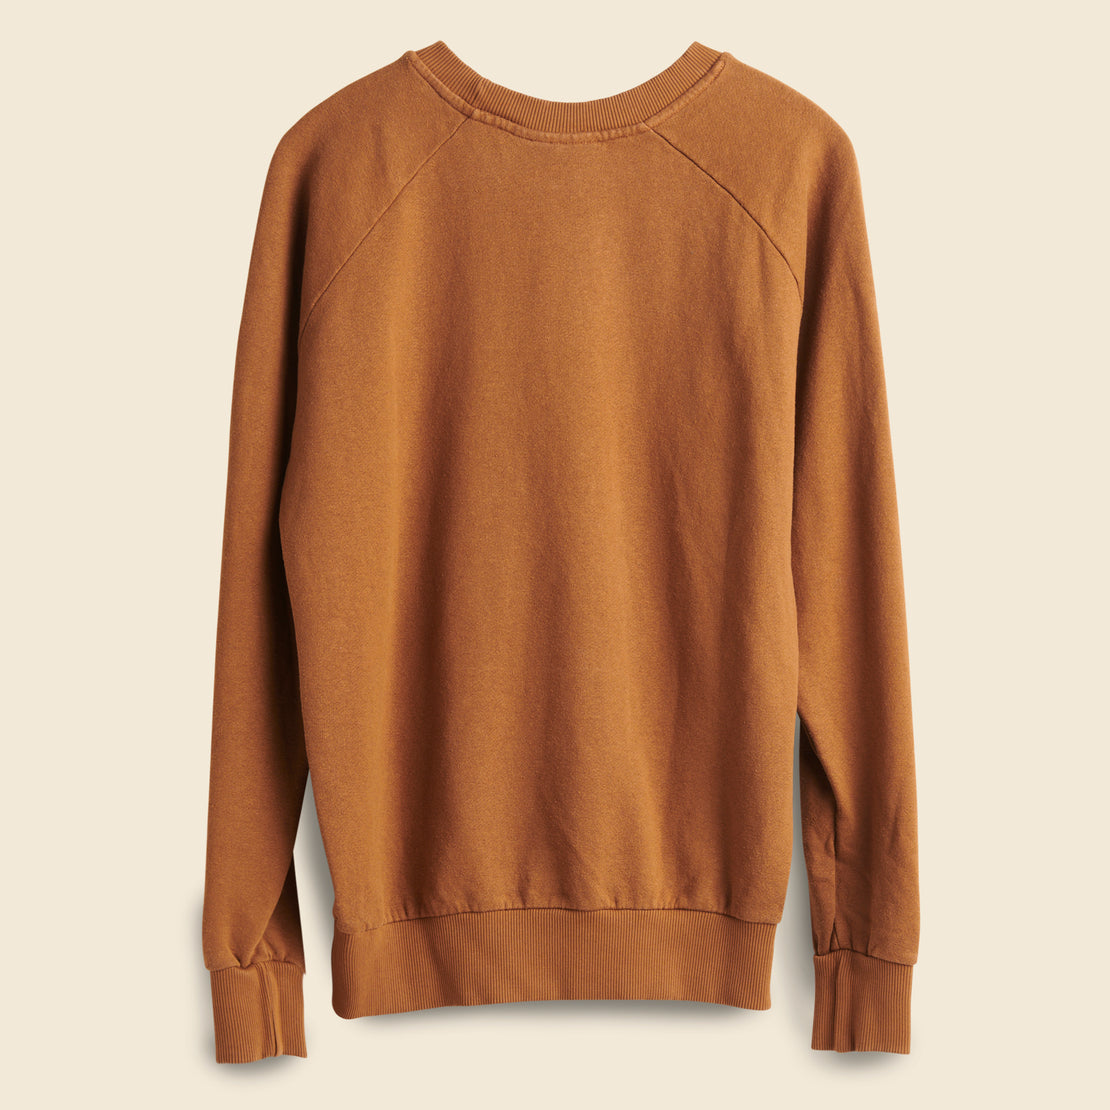 DAUGHTER Sweatshirt - Copper/Pink - Fort Lonesome - STAG Provisions - W - Tops - L/S Fleece